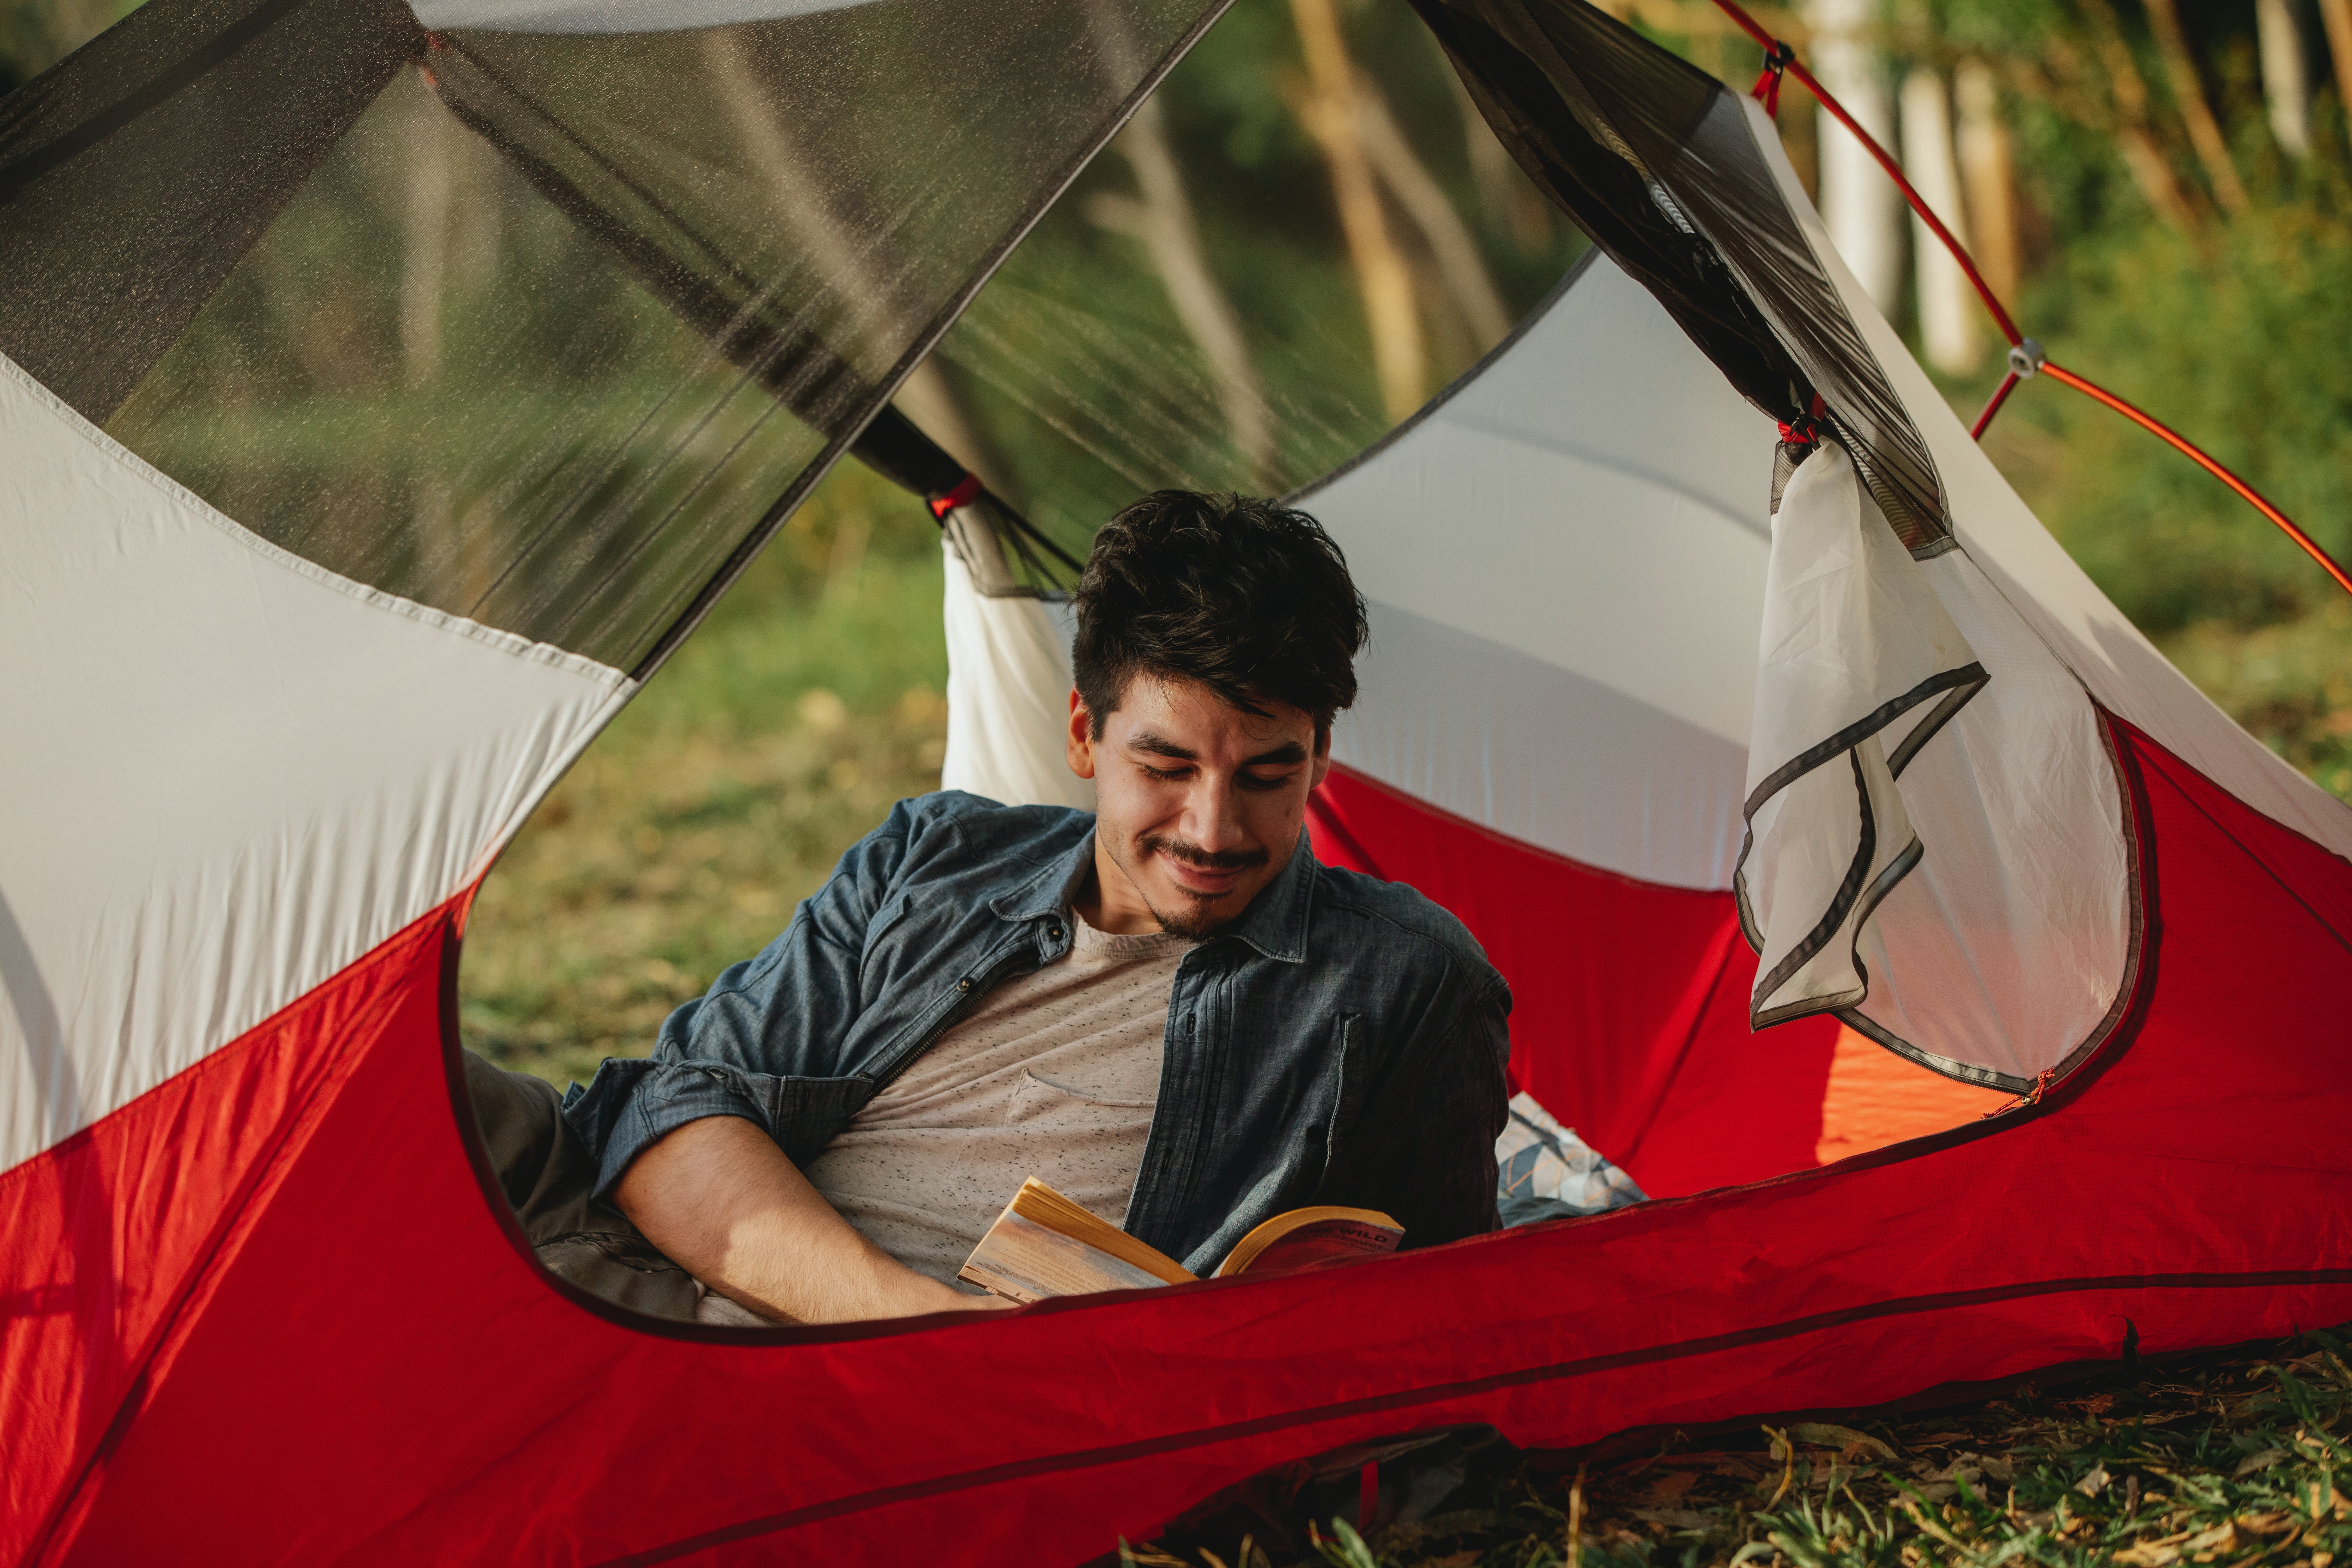 A young man smiles while reading a book inside his tent in the outdoors.